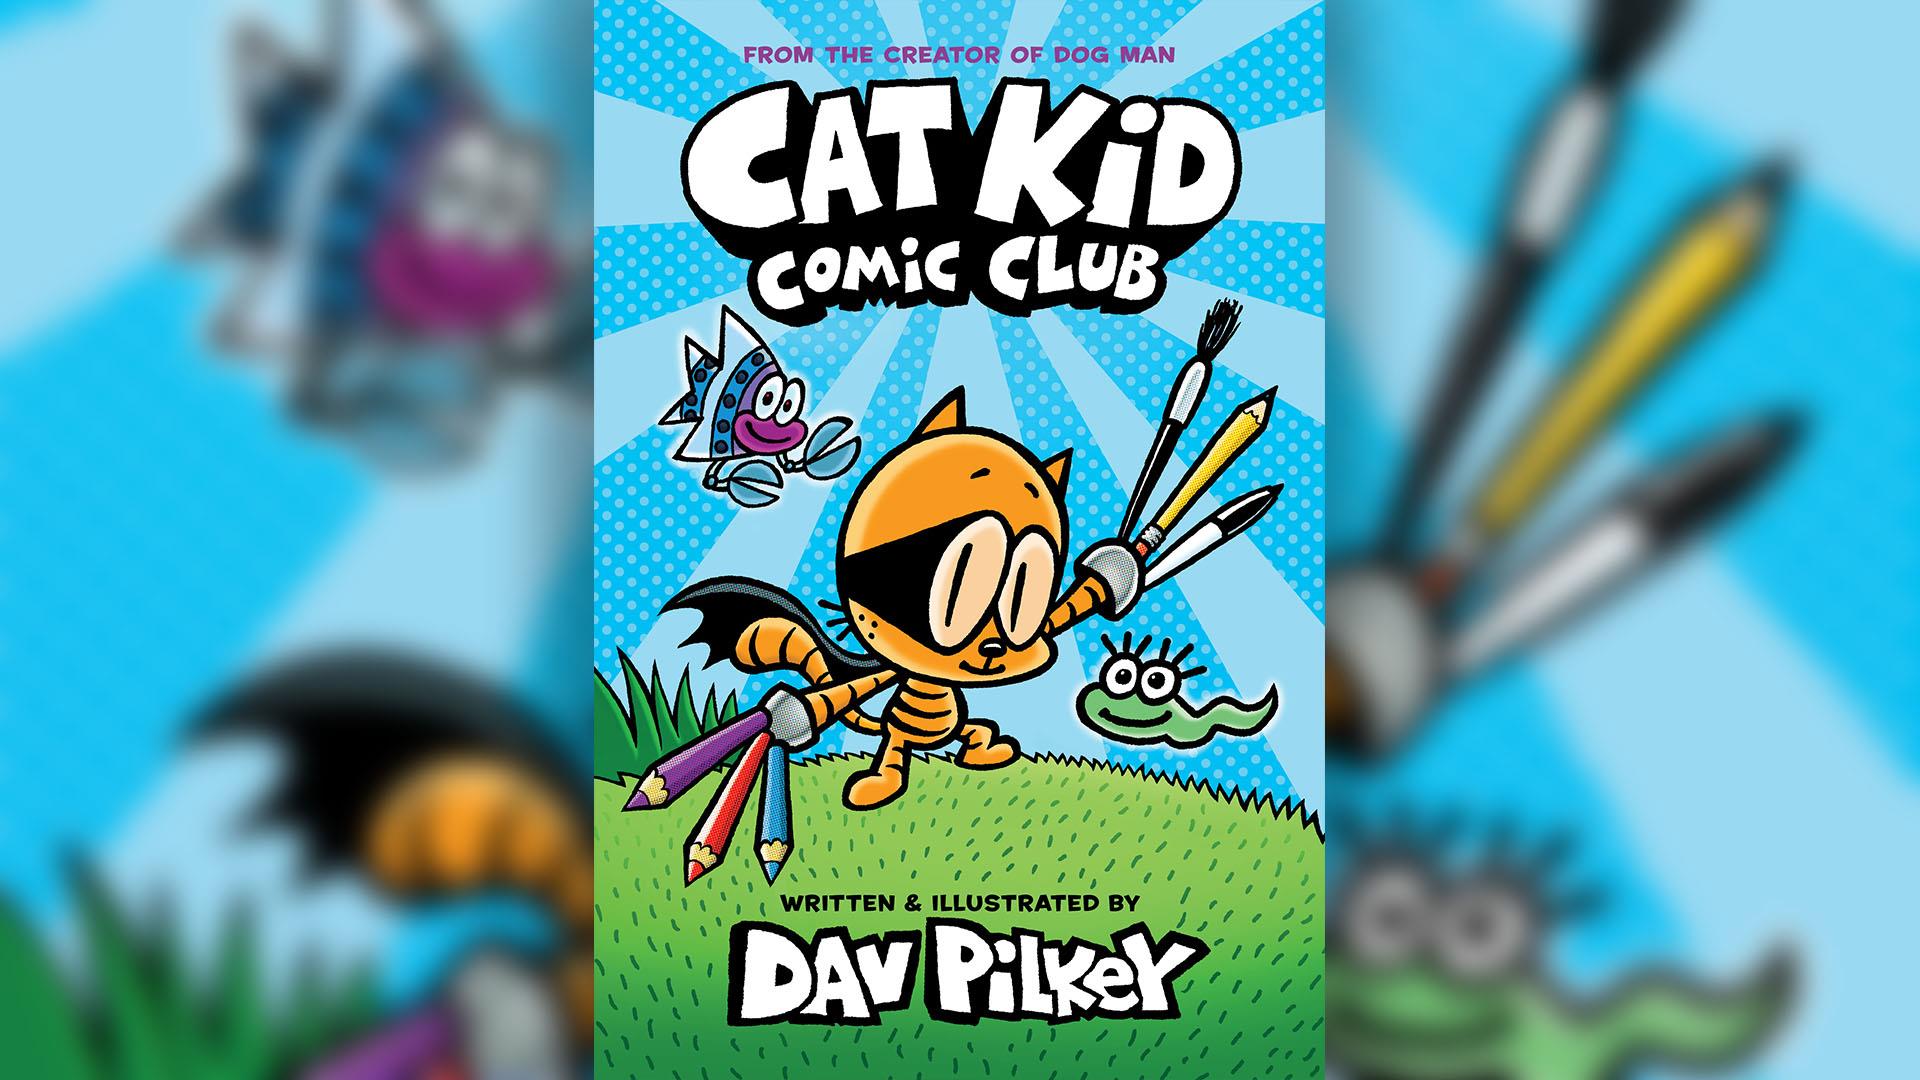 Dav Pilkey reads an exclusive excerpt from his new book, 'Cat Kid Comic Club '